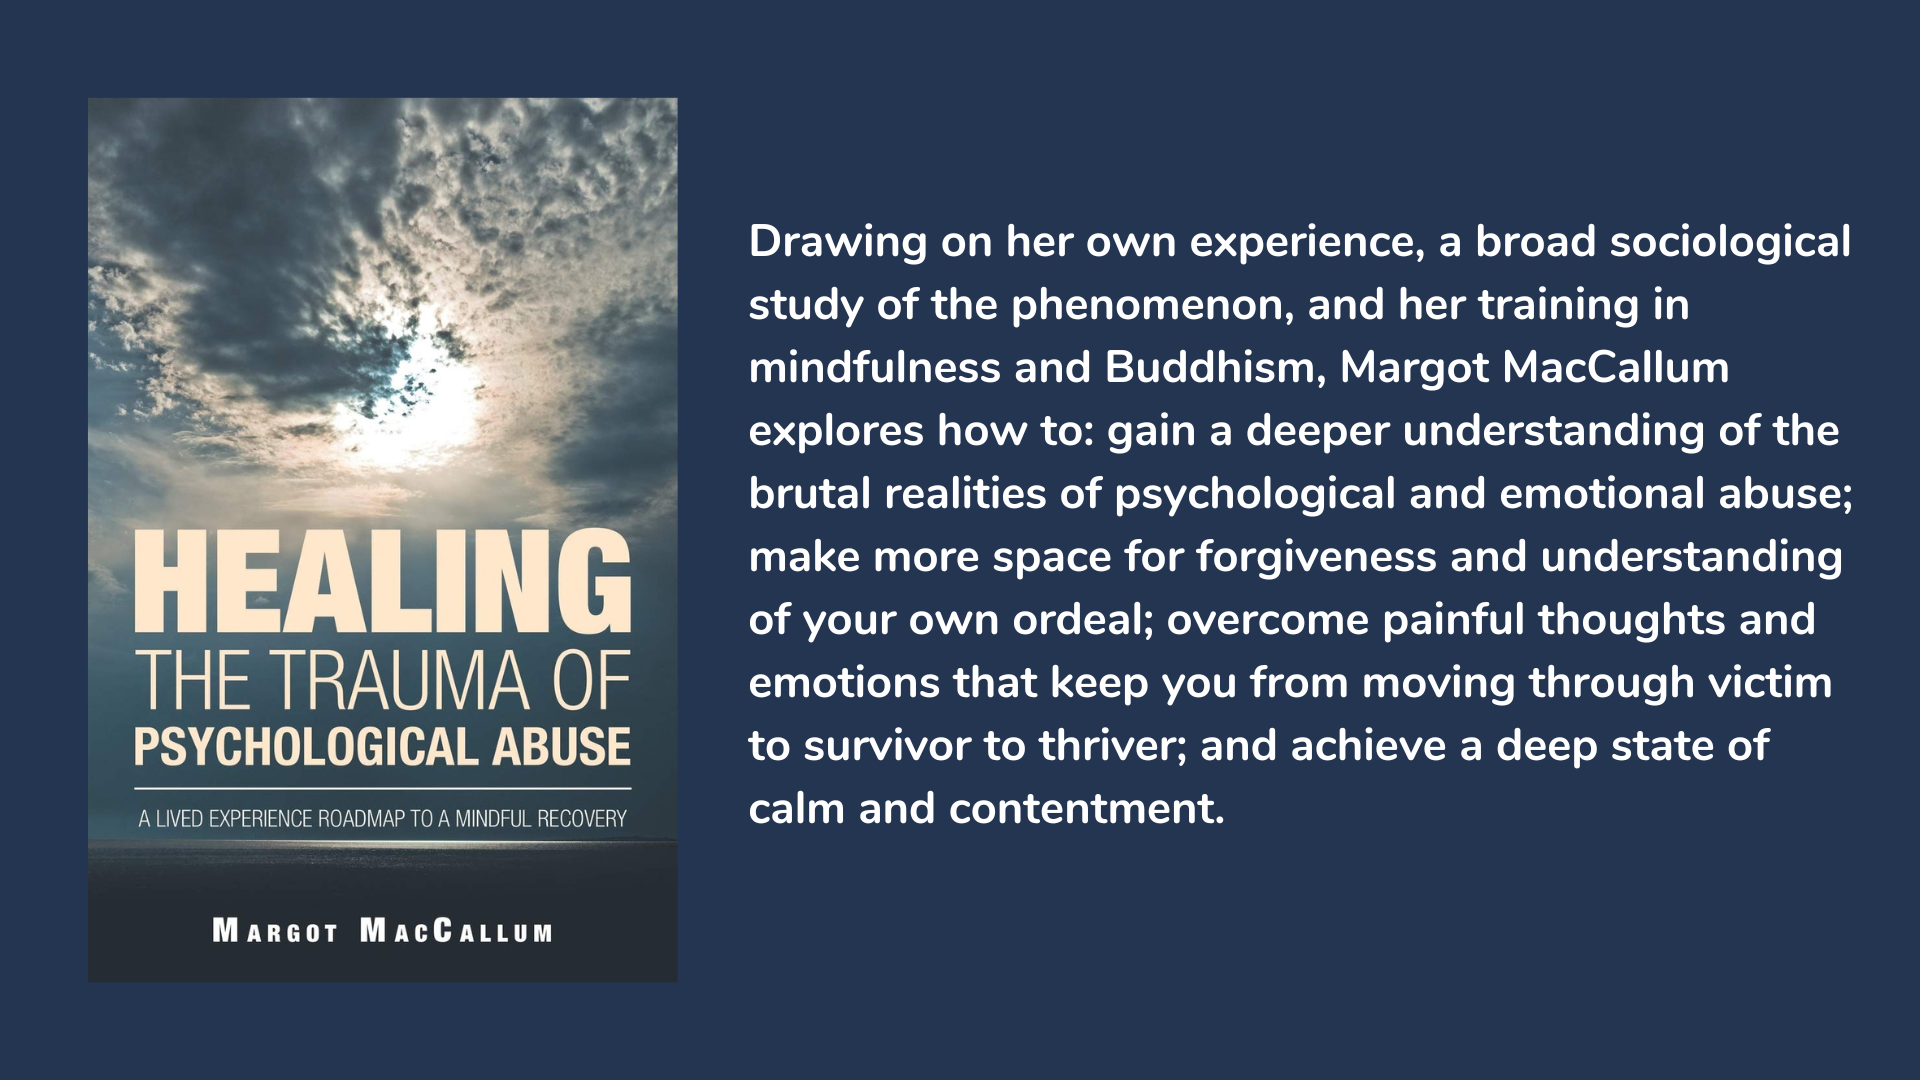 Healing the Trauma of Psychological Abuse: A Lived Experience Roadmap to a Mindful Recovery, book cover and description